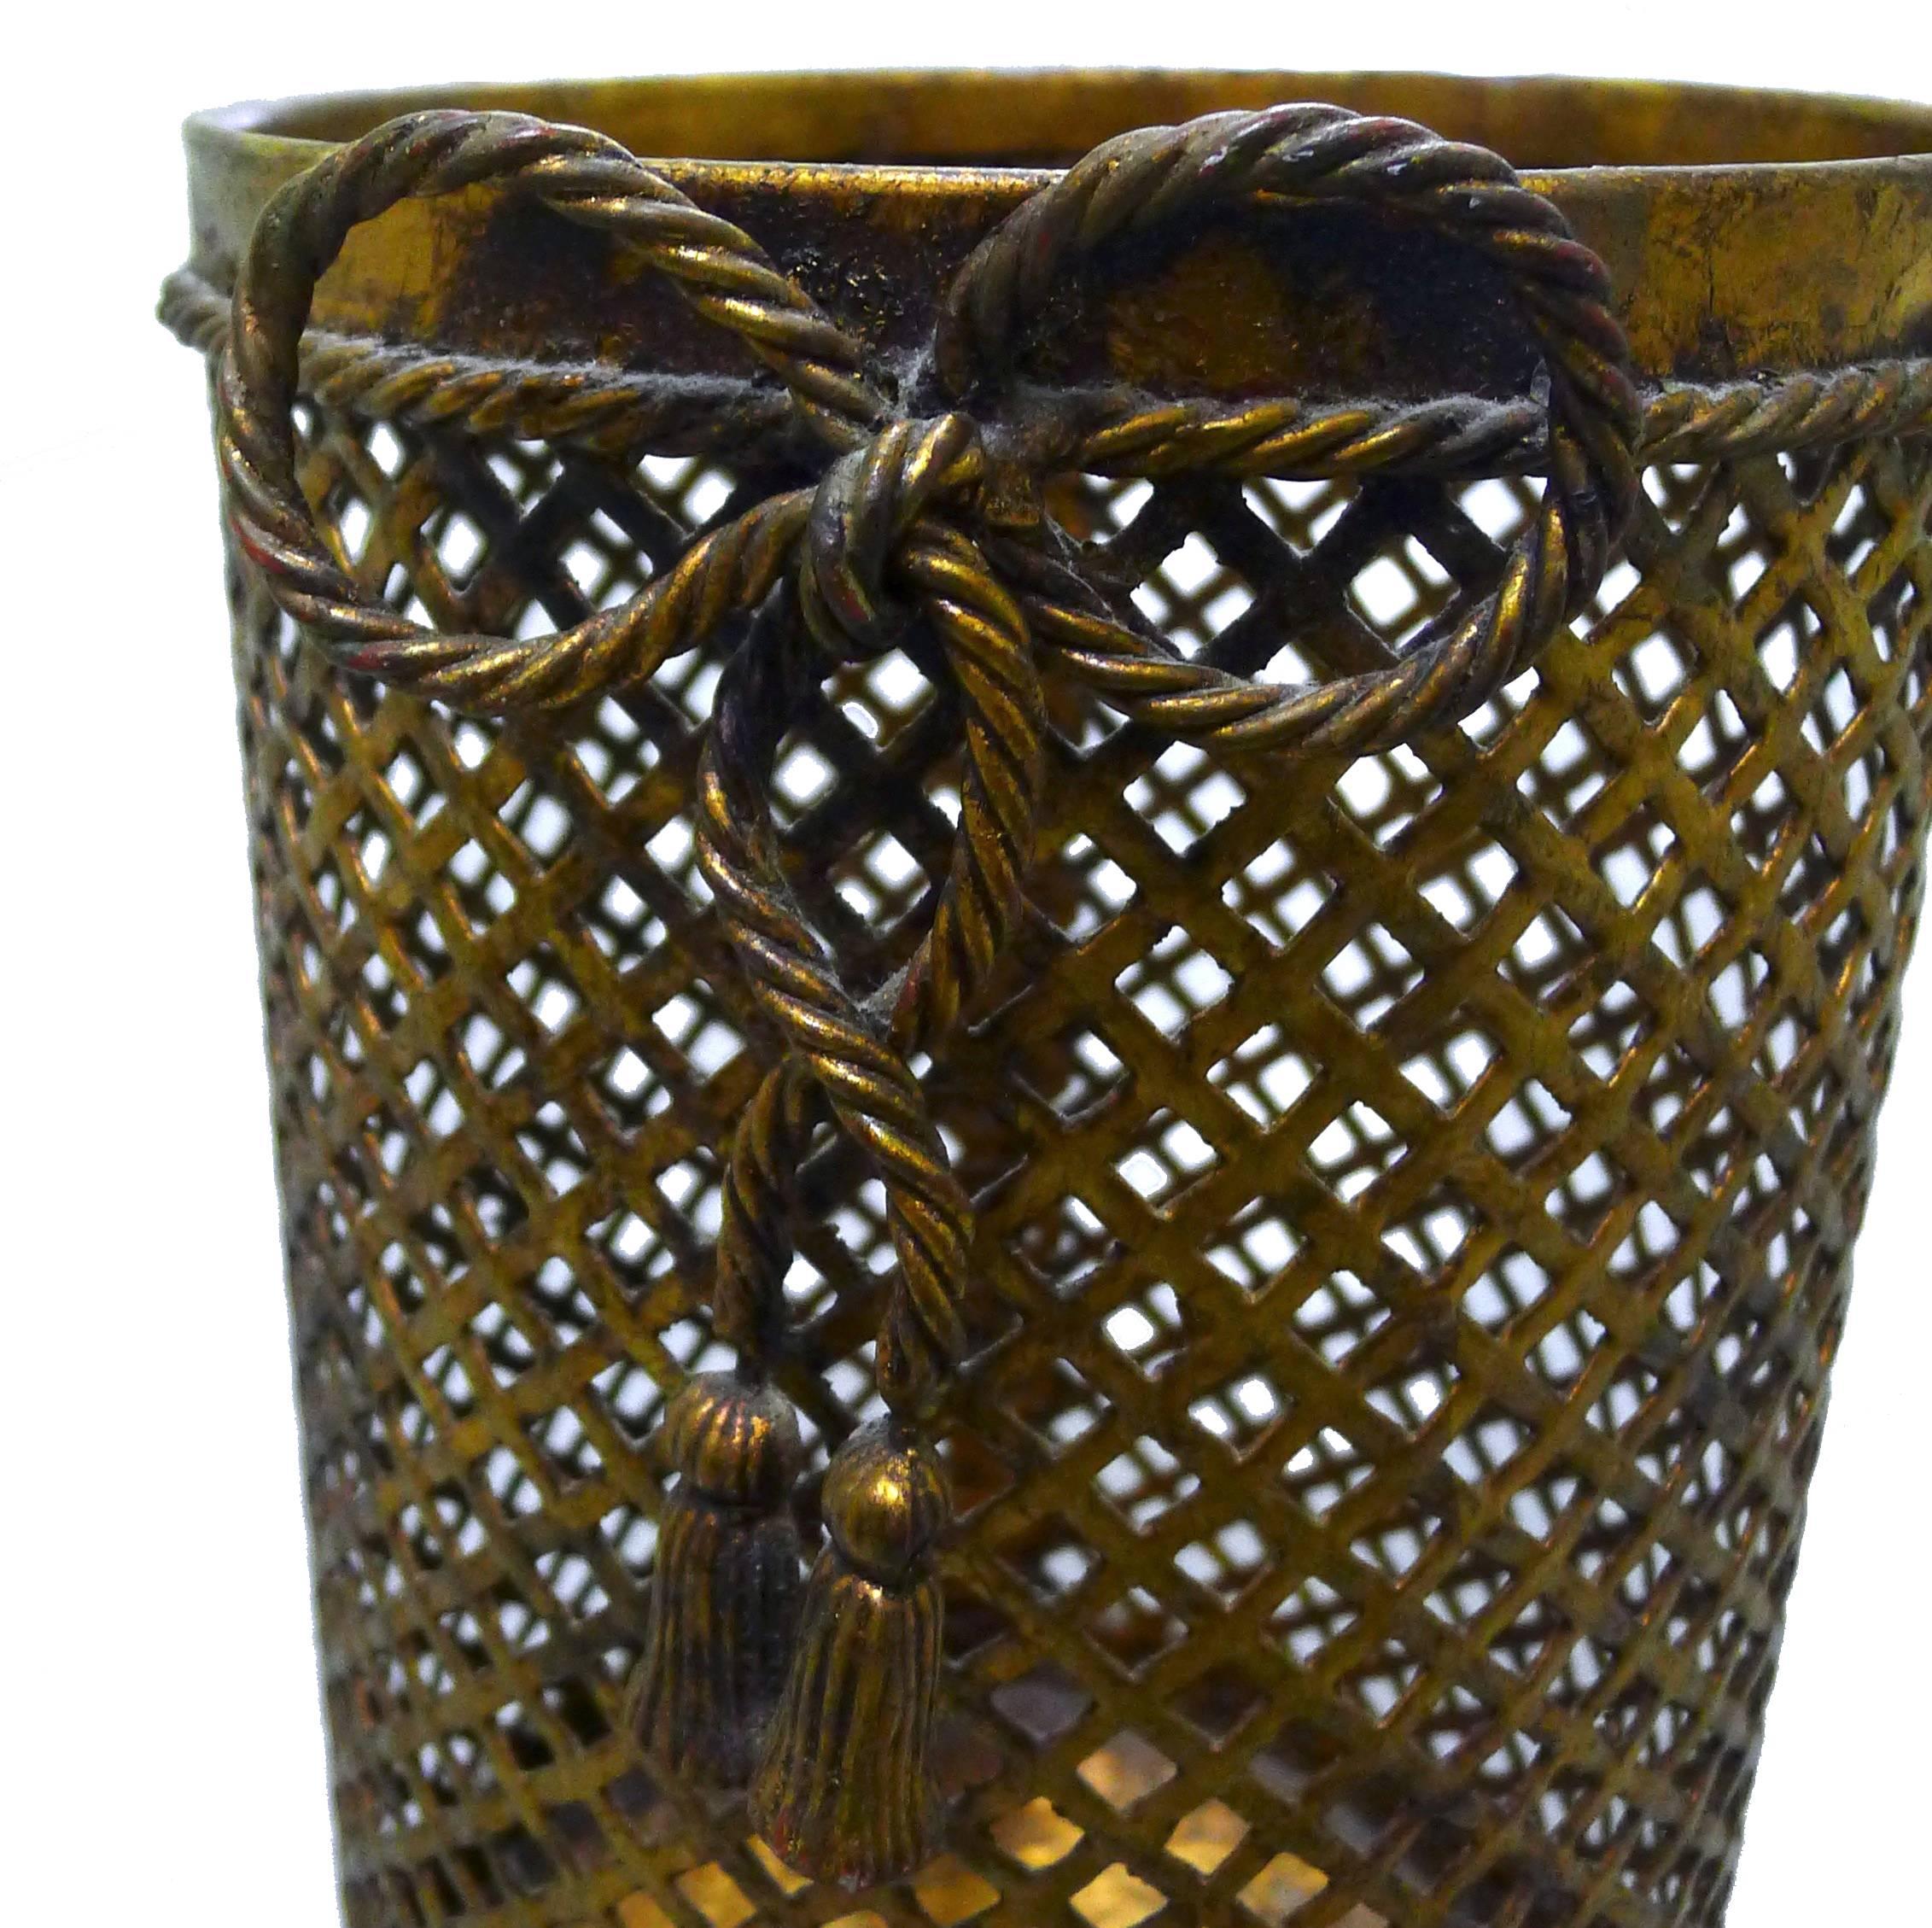 Italian gilt metal wastepaper basket. Rope bow with tassel accent. Signed Made in Italy.